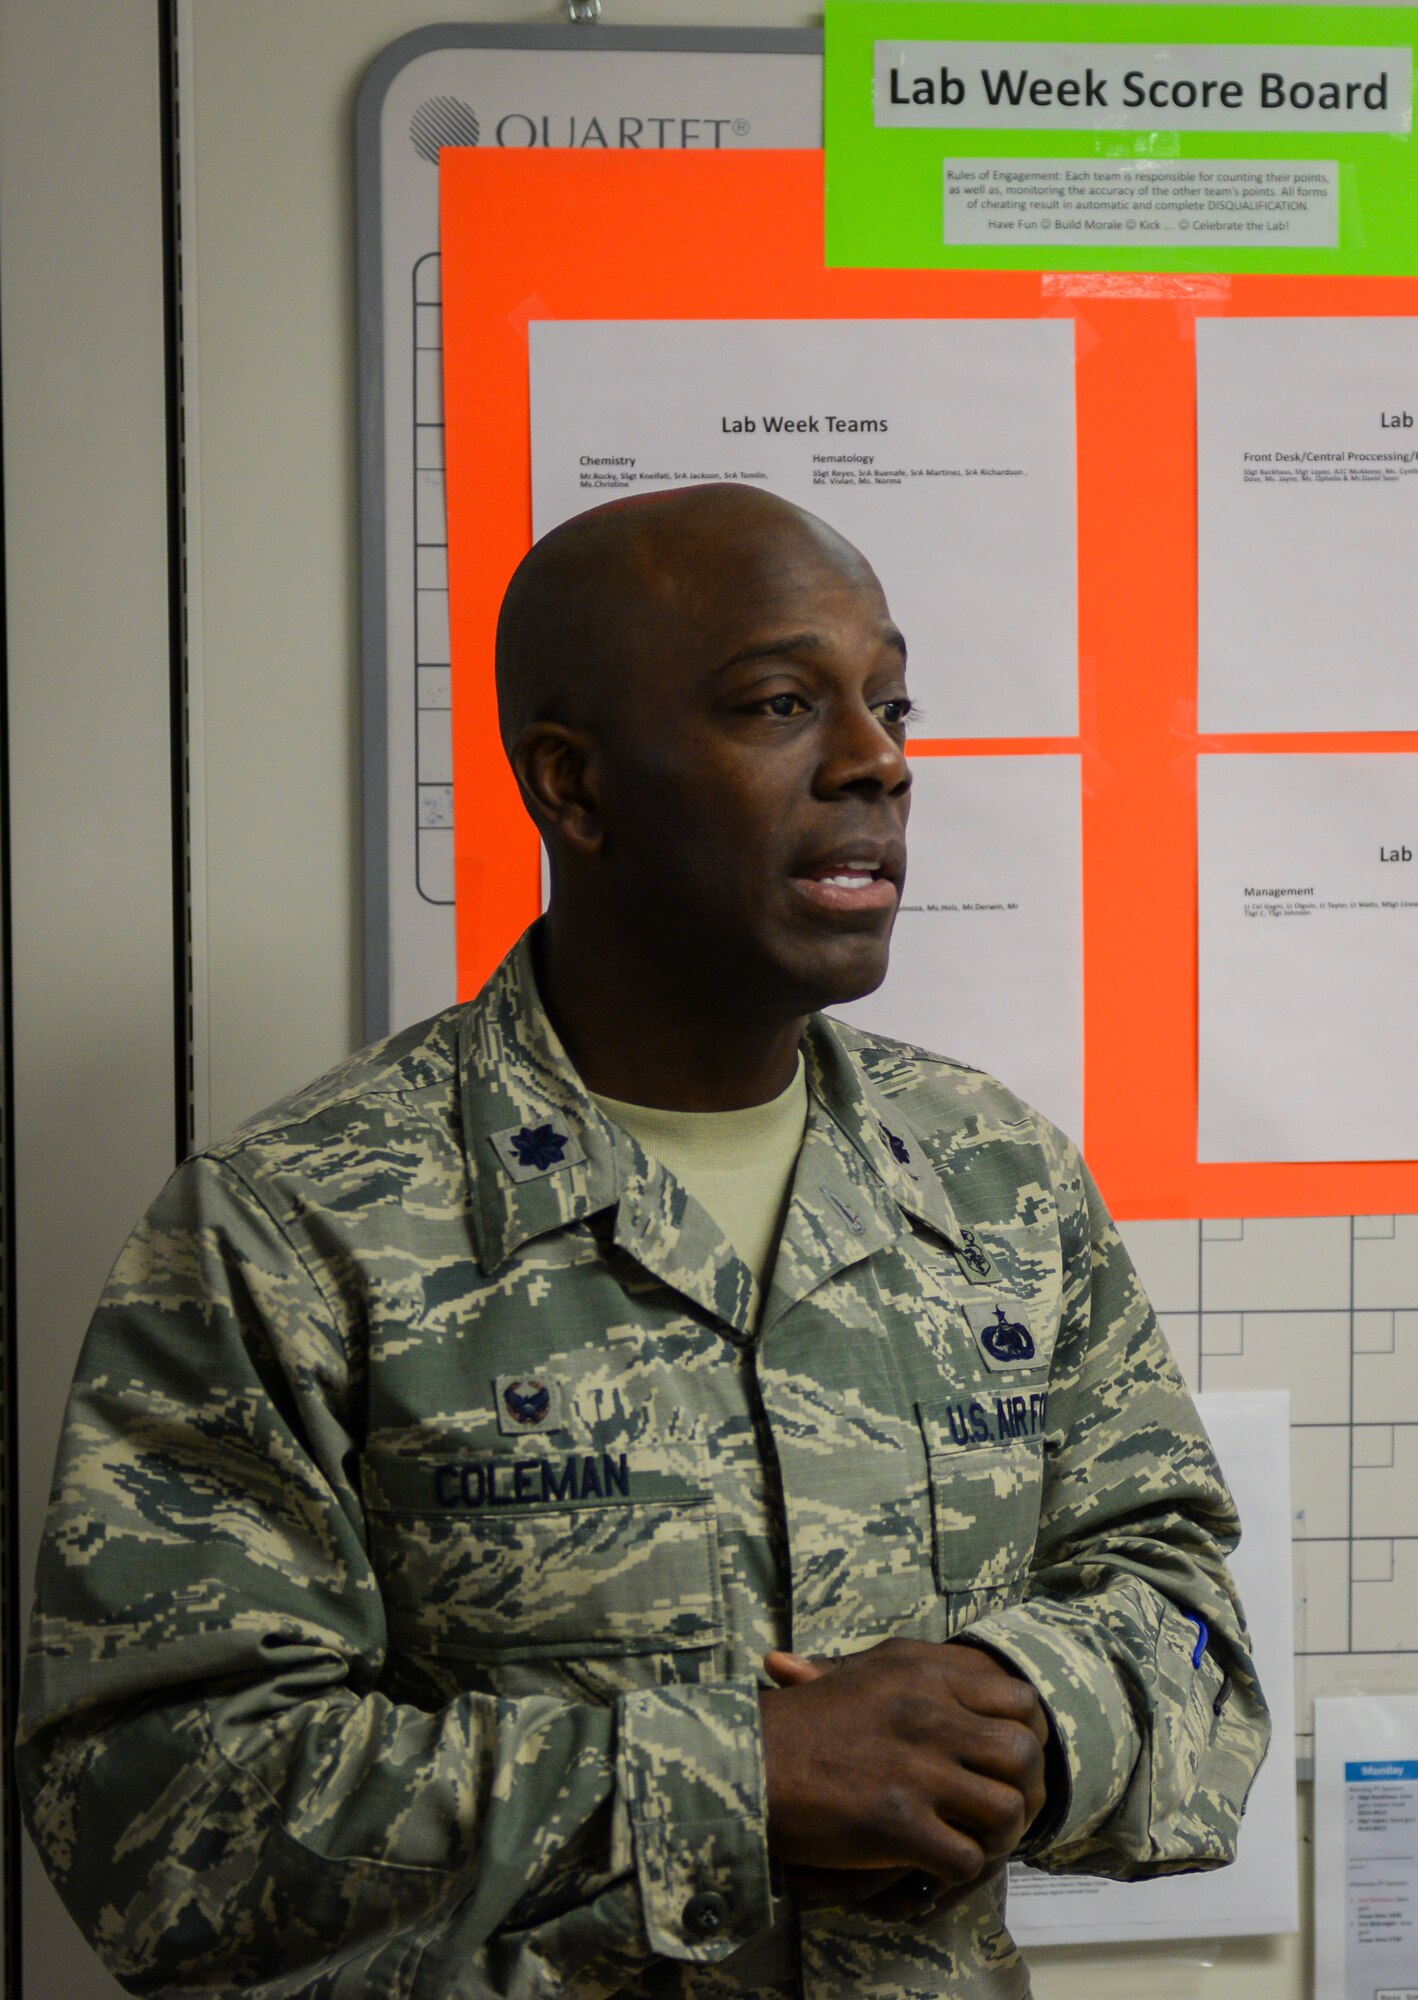 Lt. Col. Gregory Coleman, 99th Medical Support Squadron commander, helps kick off Medical Laboratory Professionals Week at Nellis Air Force Base, Nev., April 25, 2016. This week provides the profession with a unique opportunity to increase public understanding of, and appreciation for, laboratory personnel and the dedicated efforts of laboratory professionals that often go unnoticed by the general public. 